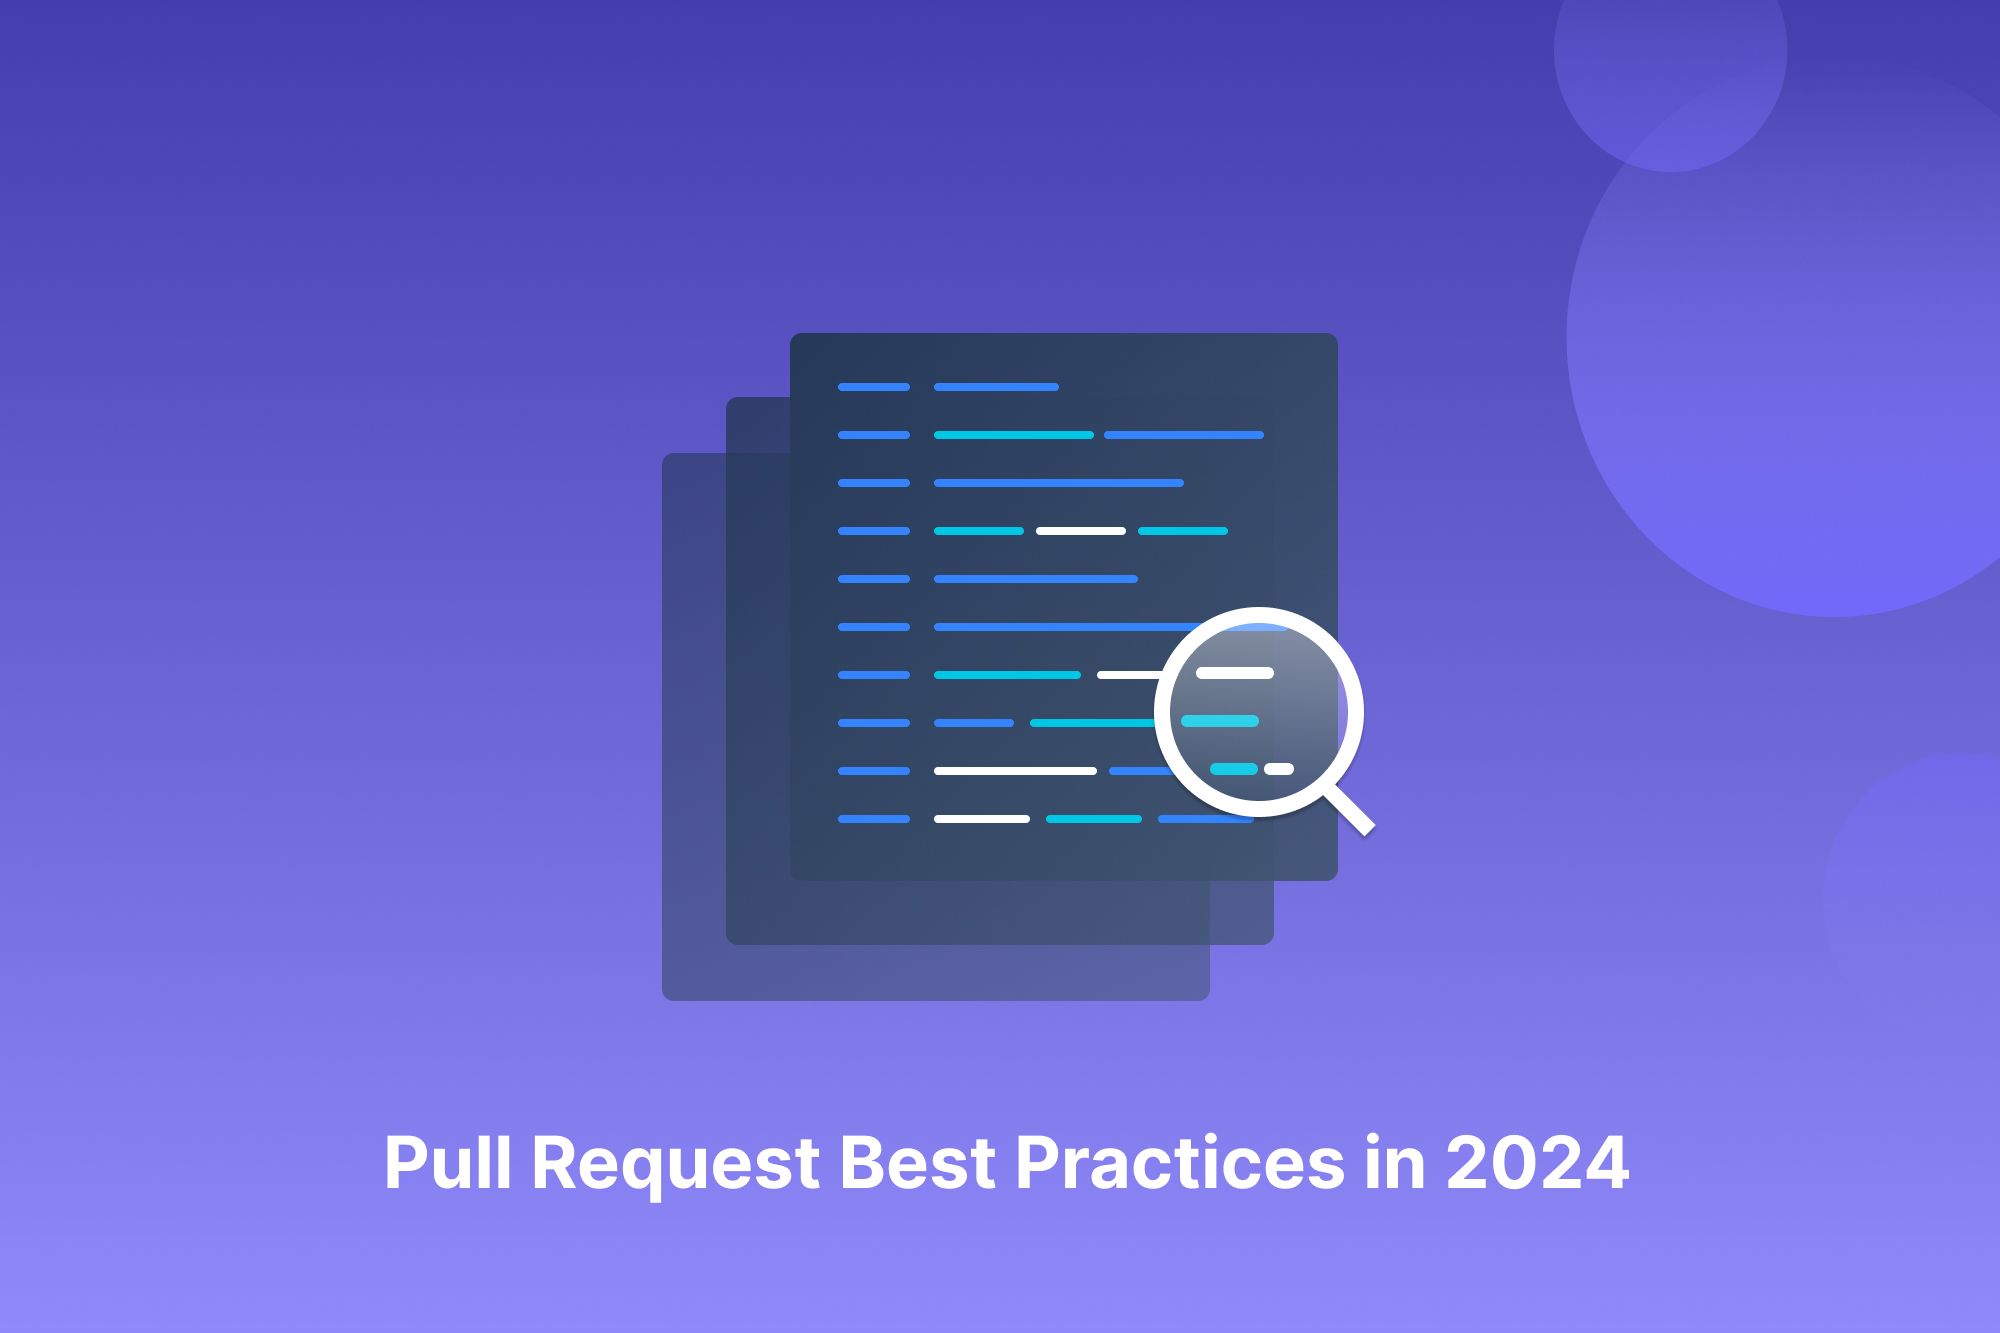 Pull Request Best Practices in 2024